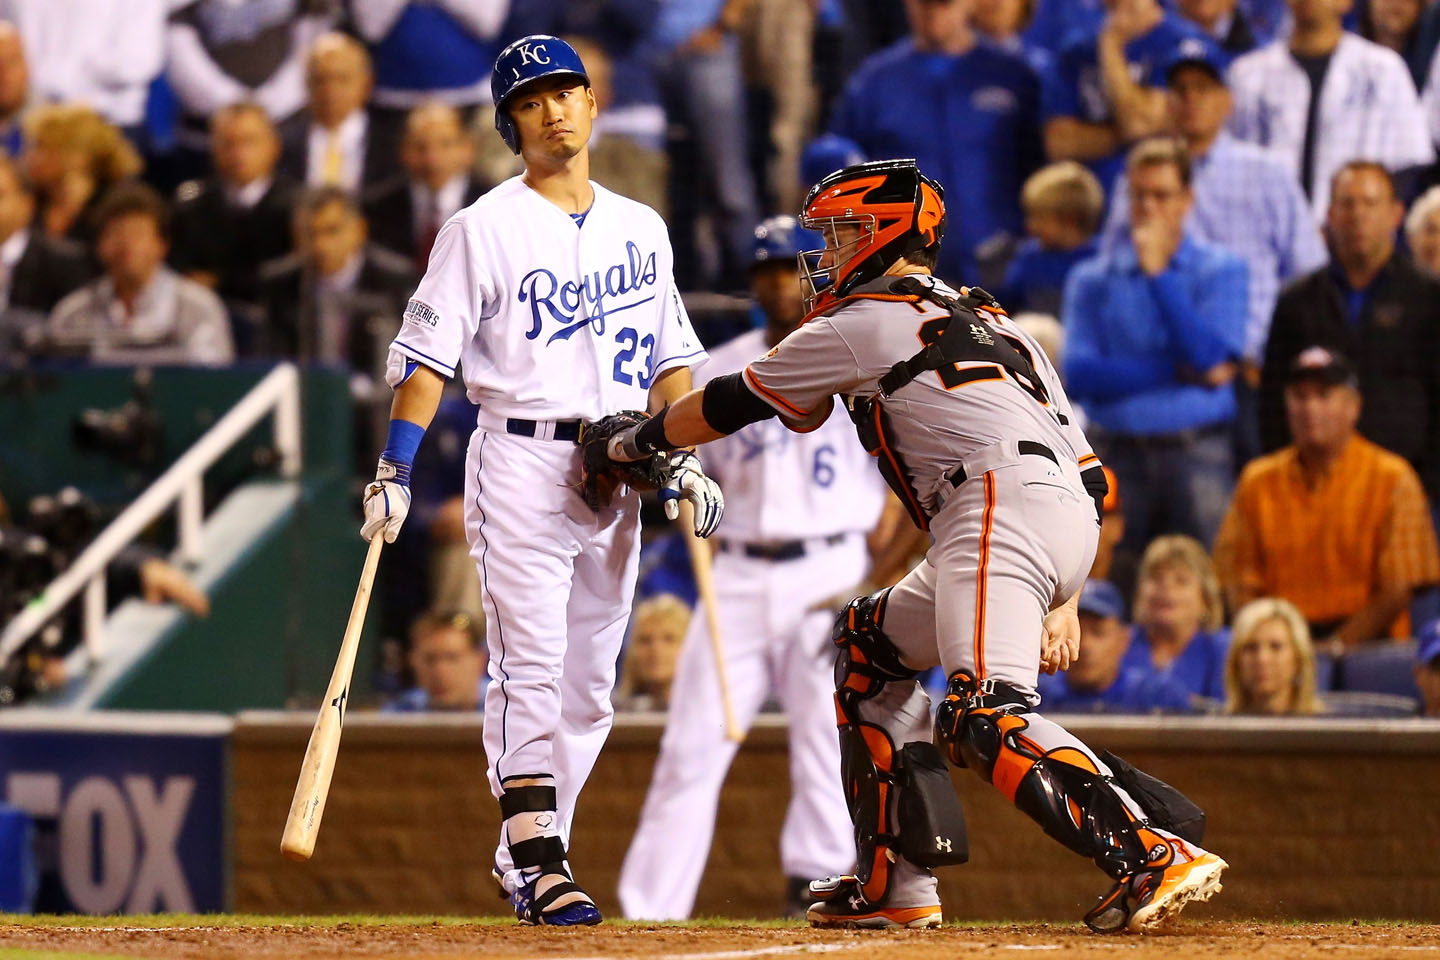 A key out for Bumgarner in the bottom of the third: striking out Nori Aoki with one out and runners on second and third. Bumgarner walked Lorenzo Cain to load the bases before Eric Hosmer grounded out to end the the threat.  (Dilip Vishwanat/Getty Images)